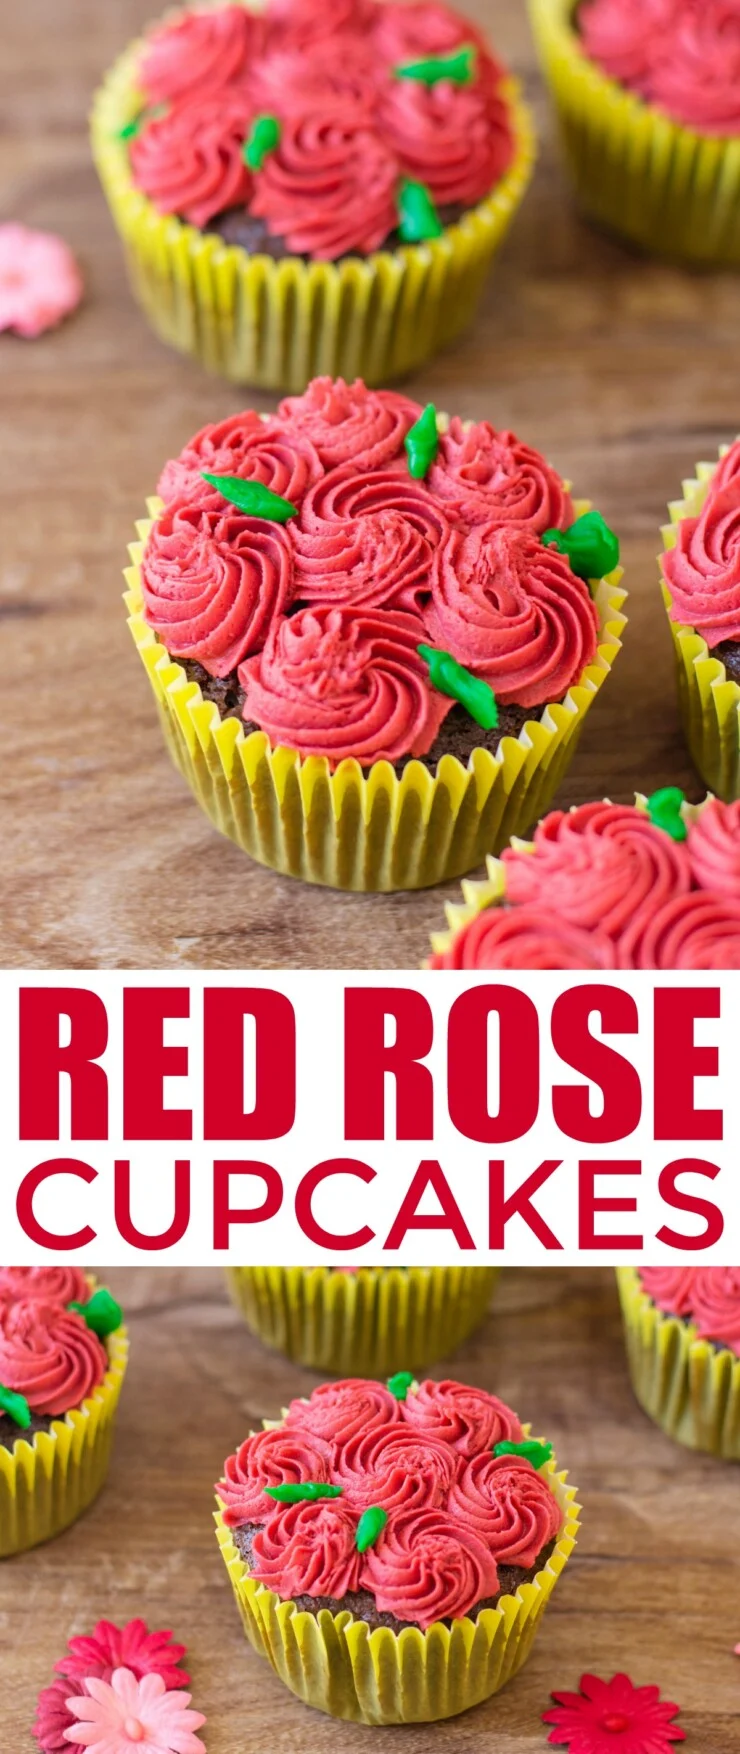 These Red Rose Cupcakes are a sweet treat perfect for garden parties, valentines day or just to show someone you care.